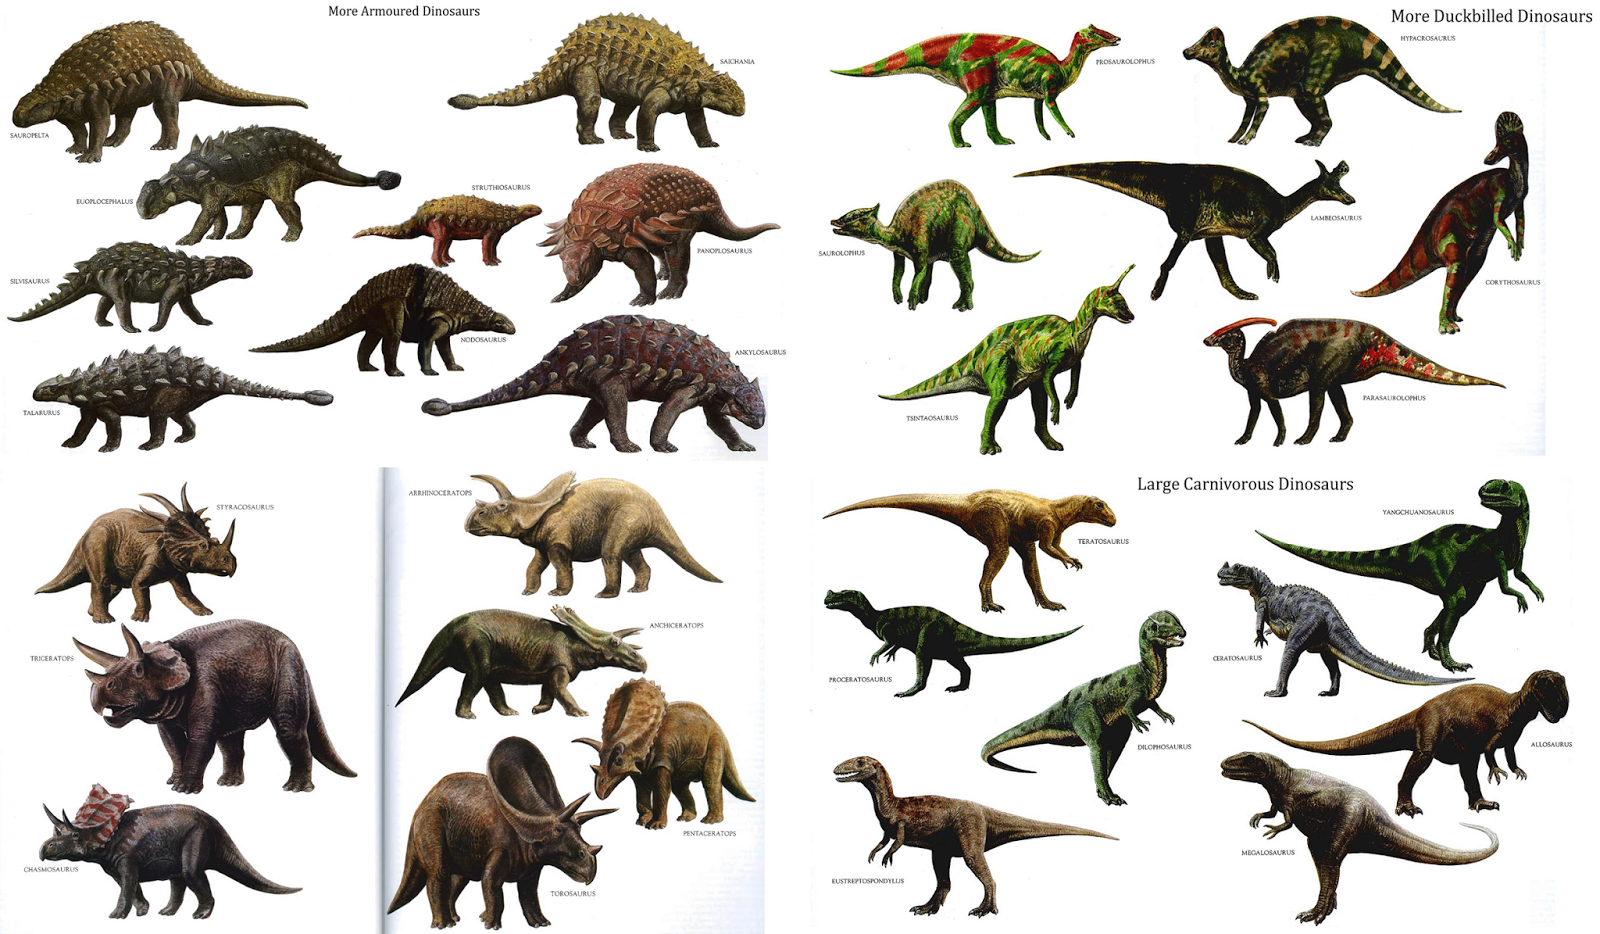 cretaceous-period-dinosaurs-list-of-dinosaurs-of-the-cretaceous-period-5a6